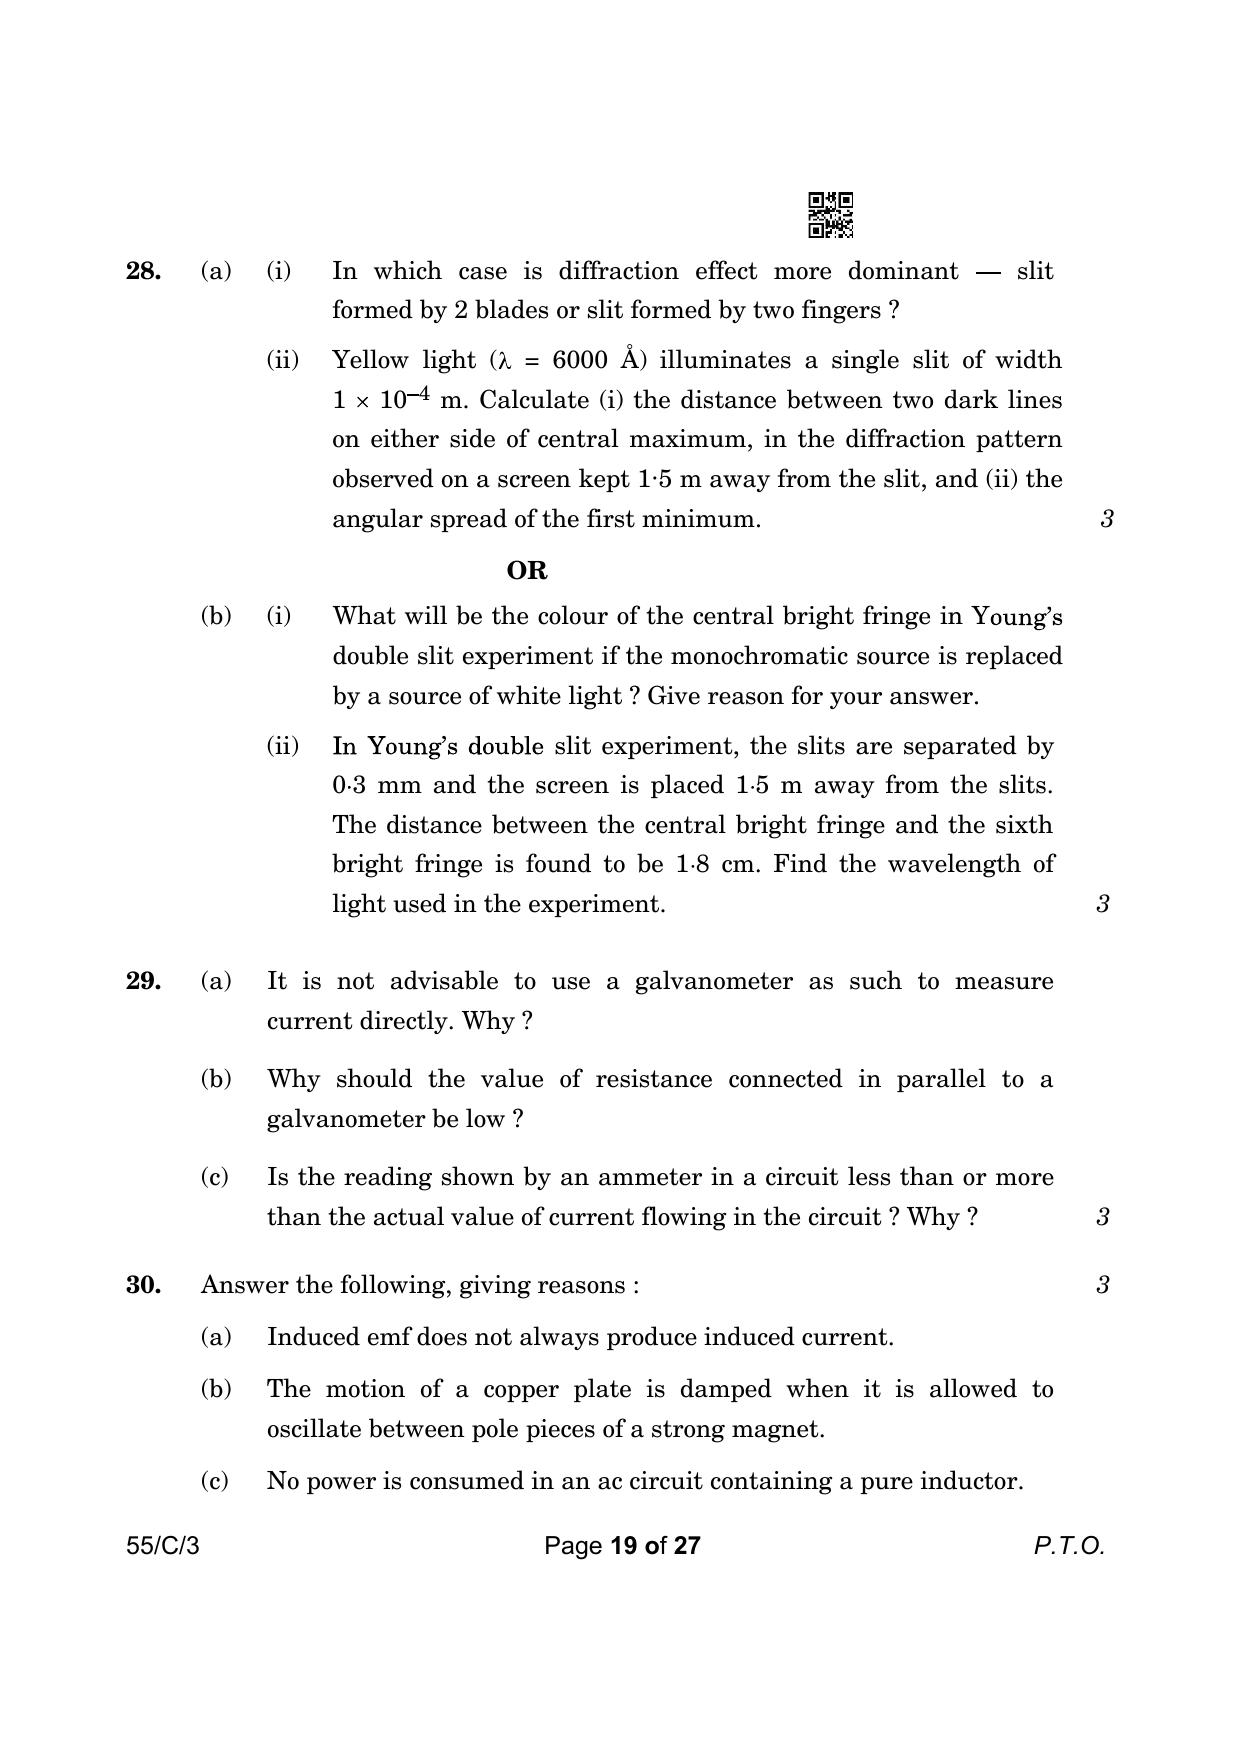 CBSE Class 12 55-3 Physics 2023 (Compartment) Question Paper - Page 19